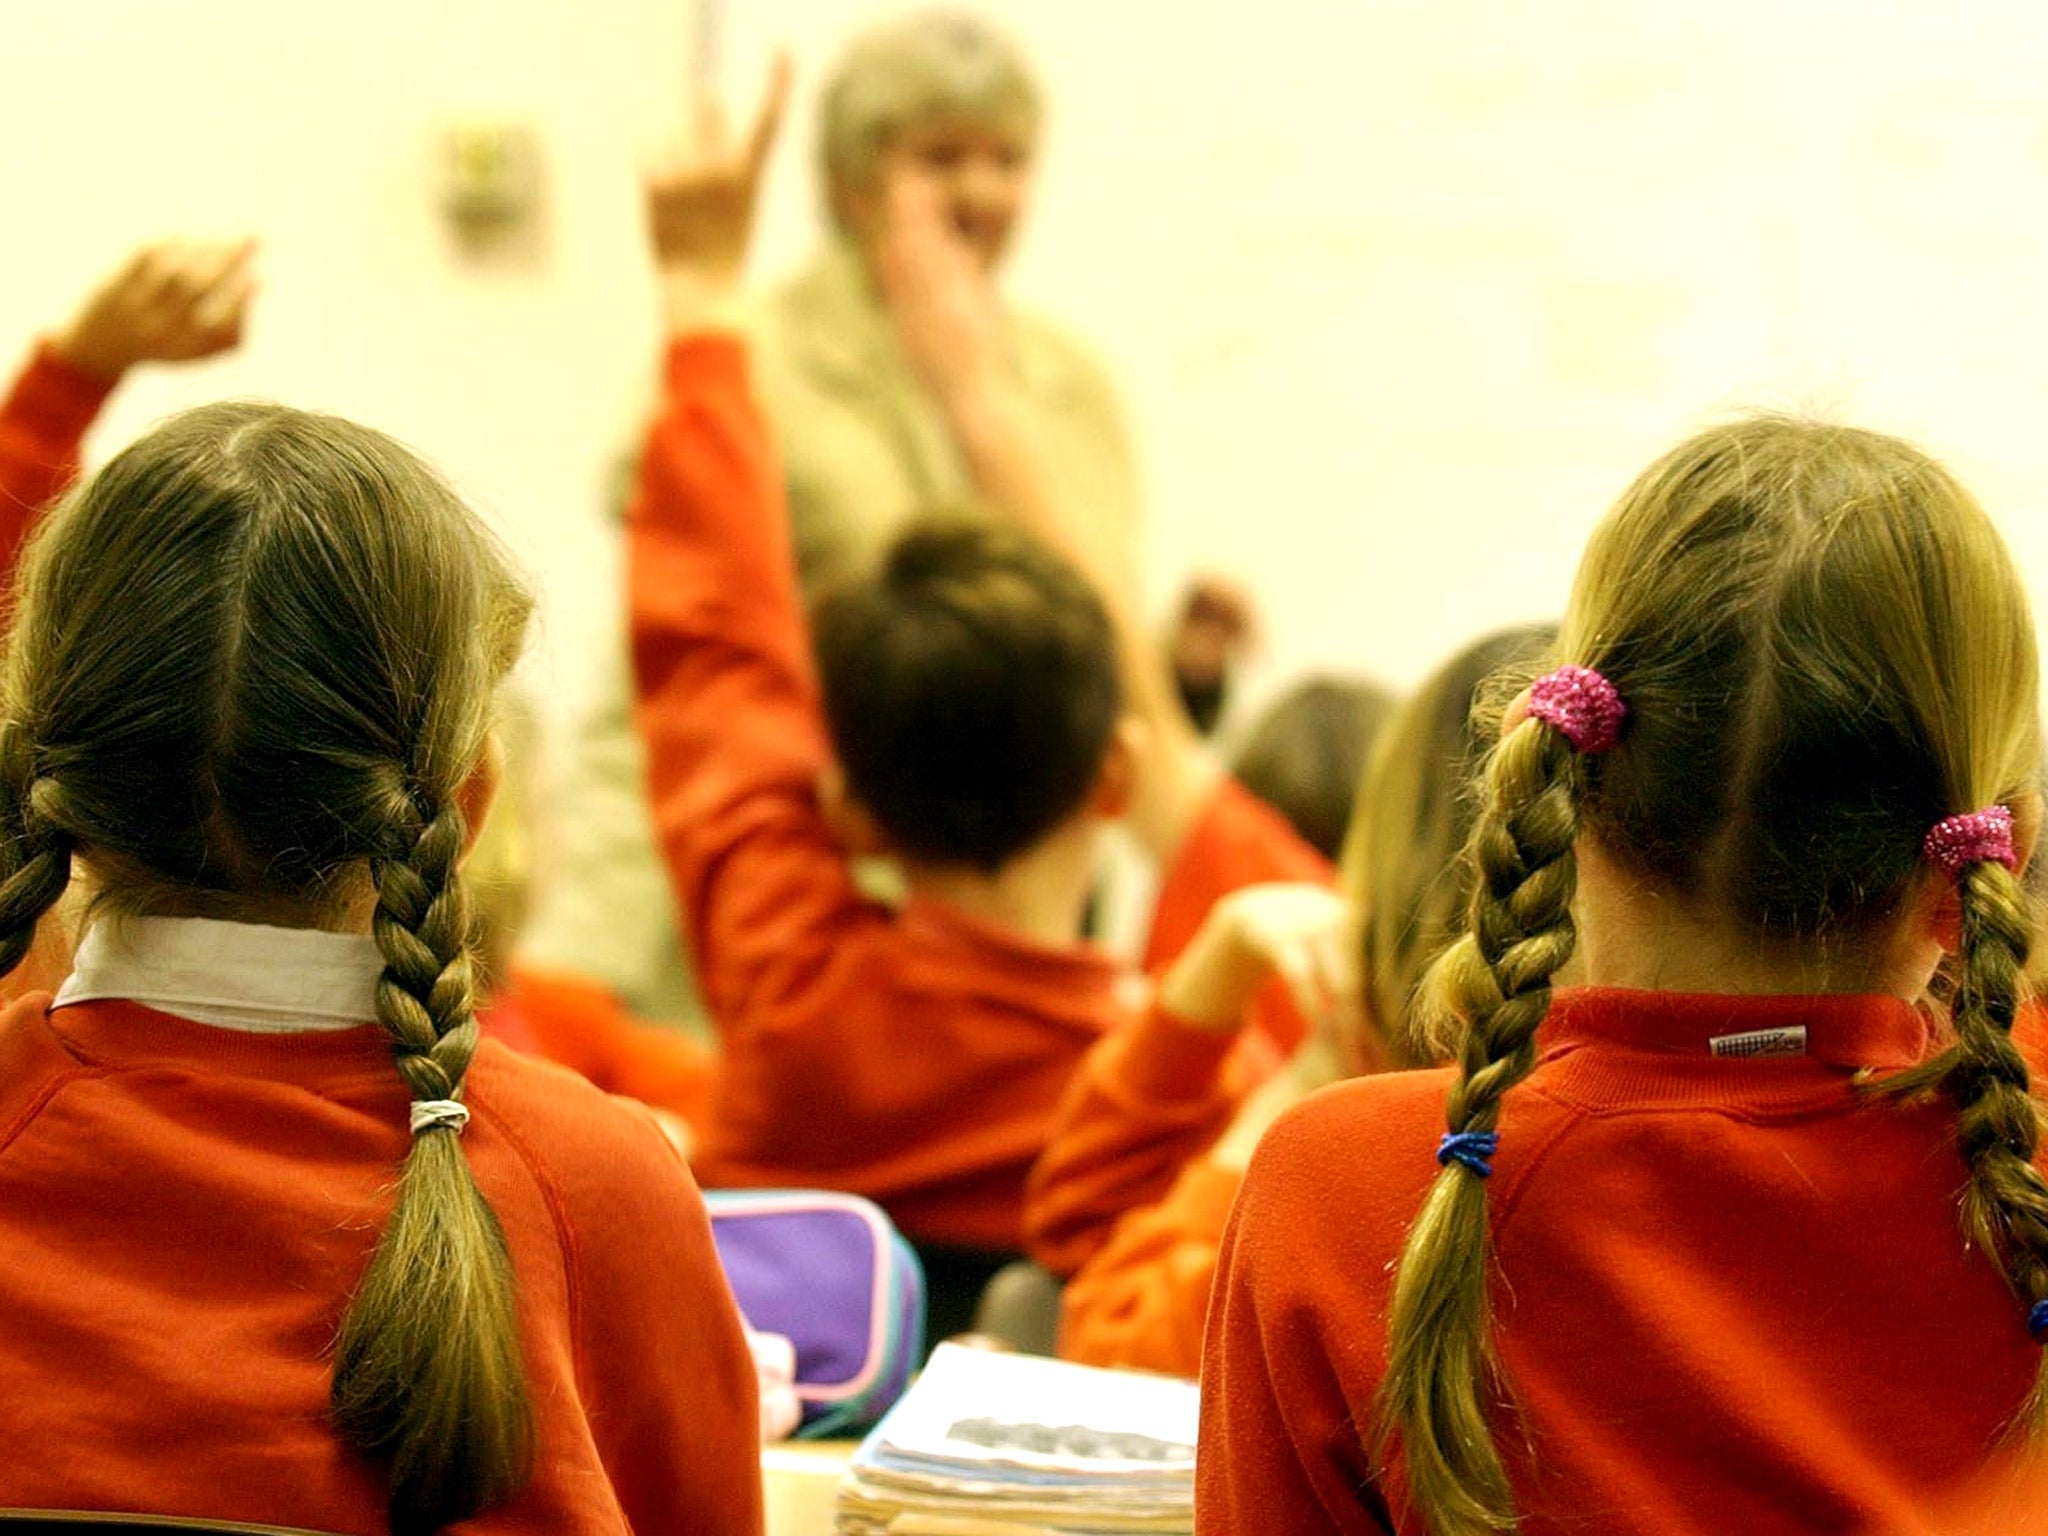 The LMA estimate an extra 130,000 primary places will be needed by 2017/18